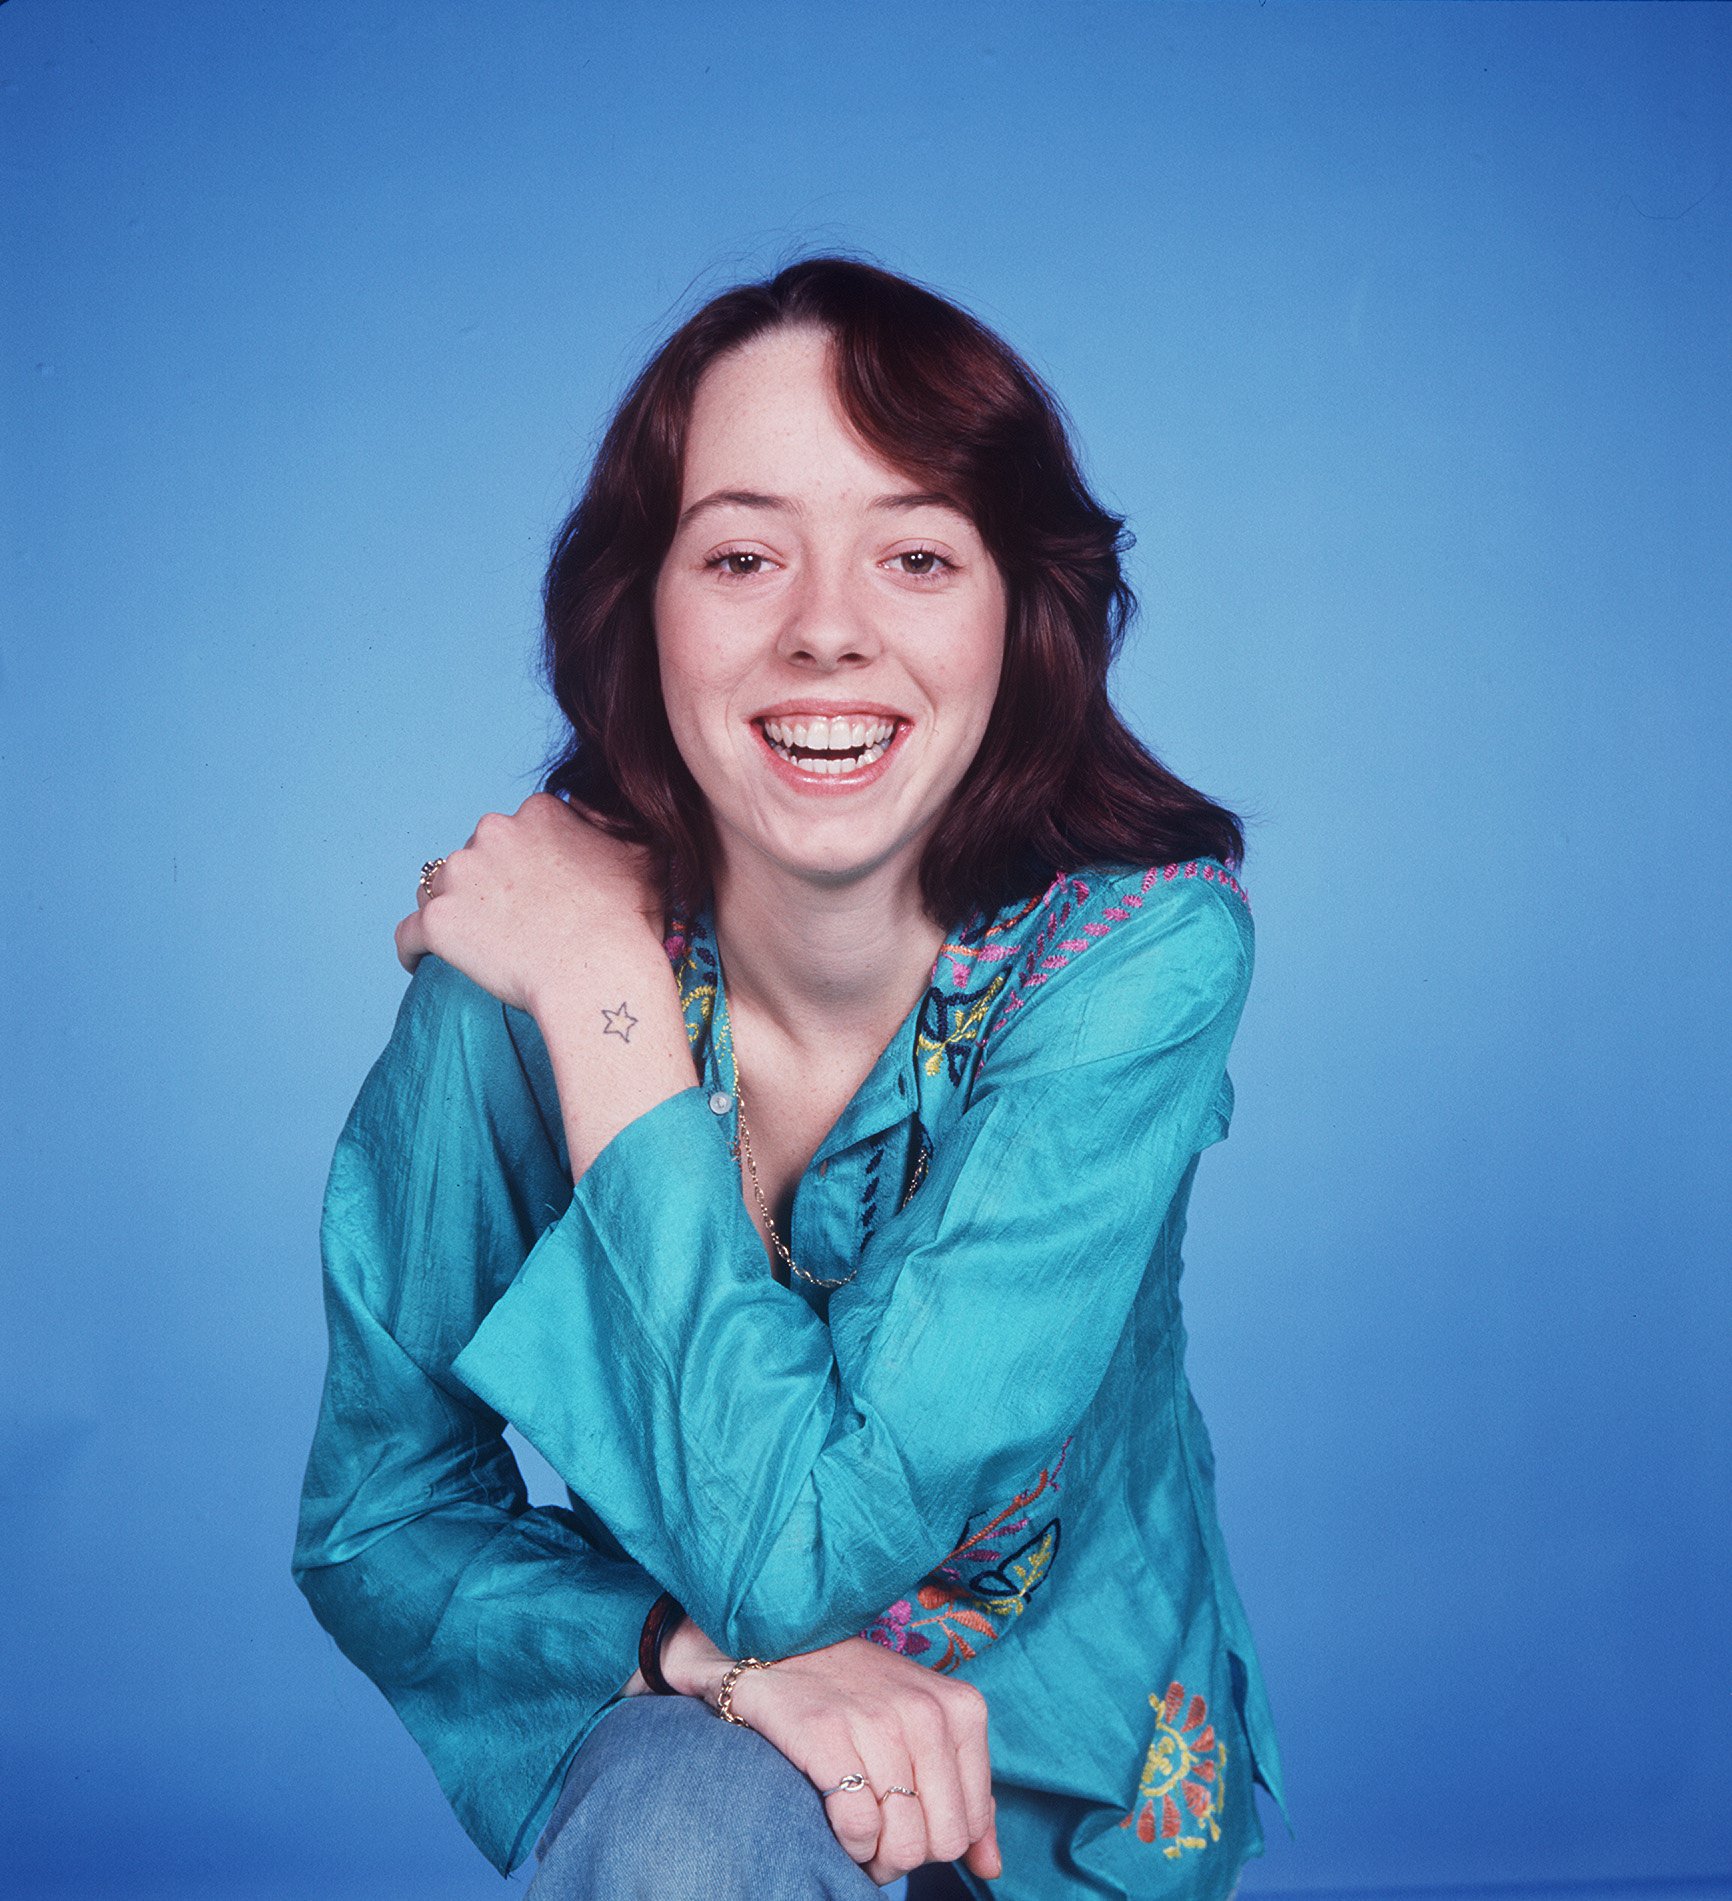 "One Day at a Time" cast member Mackenzie Phillips as Julie Cooper on January 1, Los Angeles, California | Photo: Getty Images